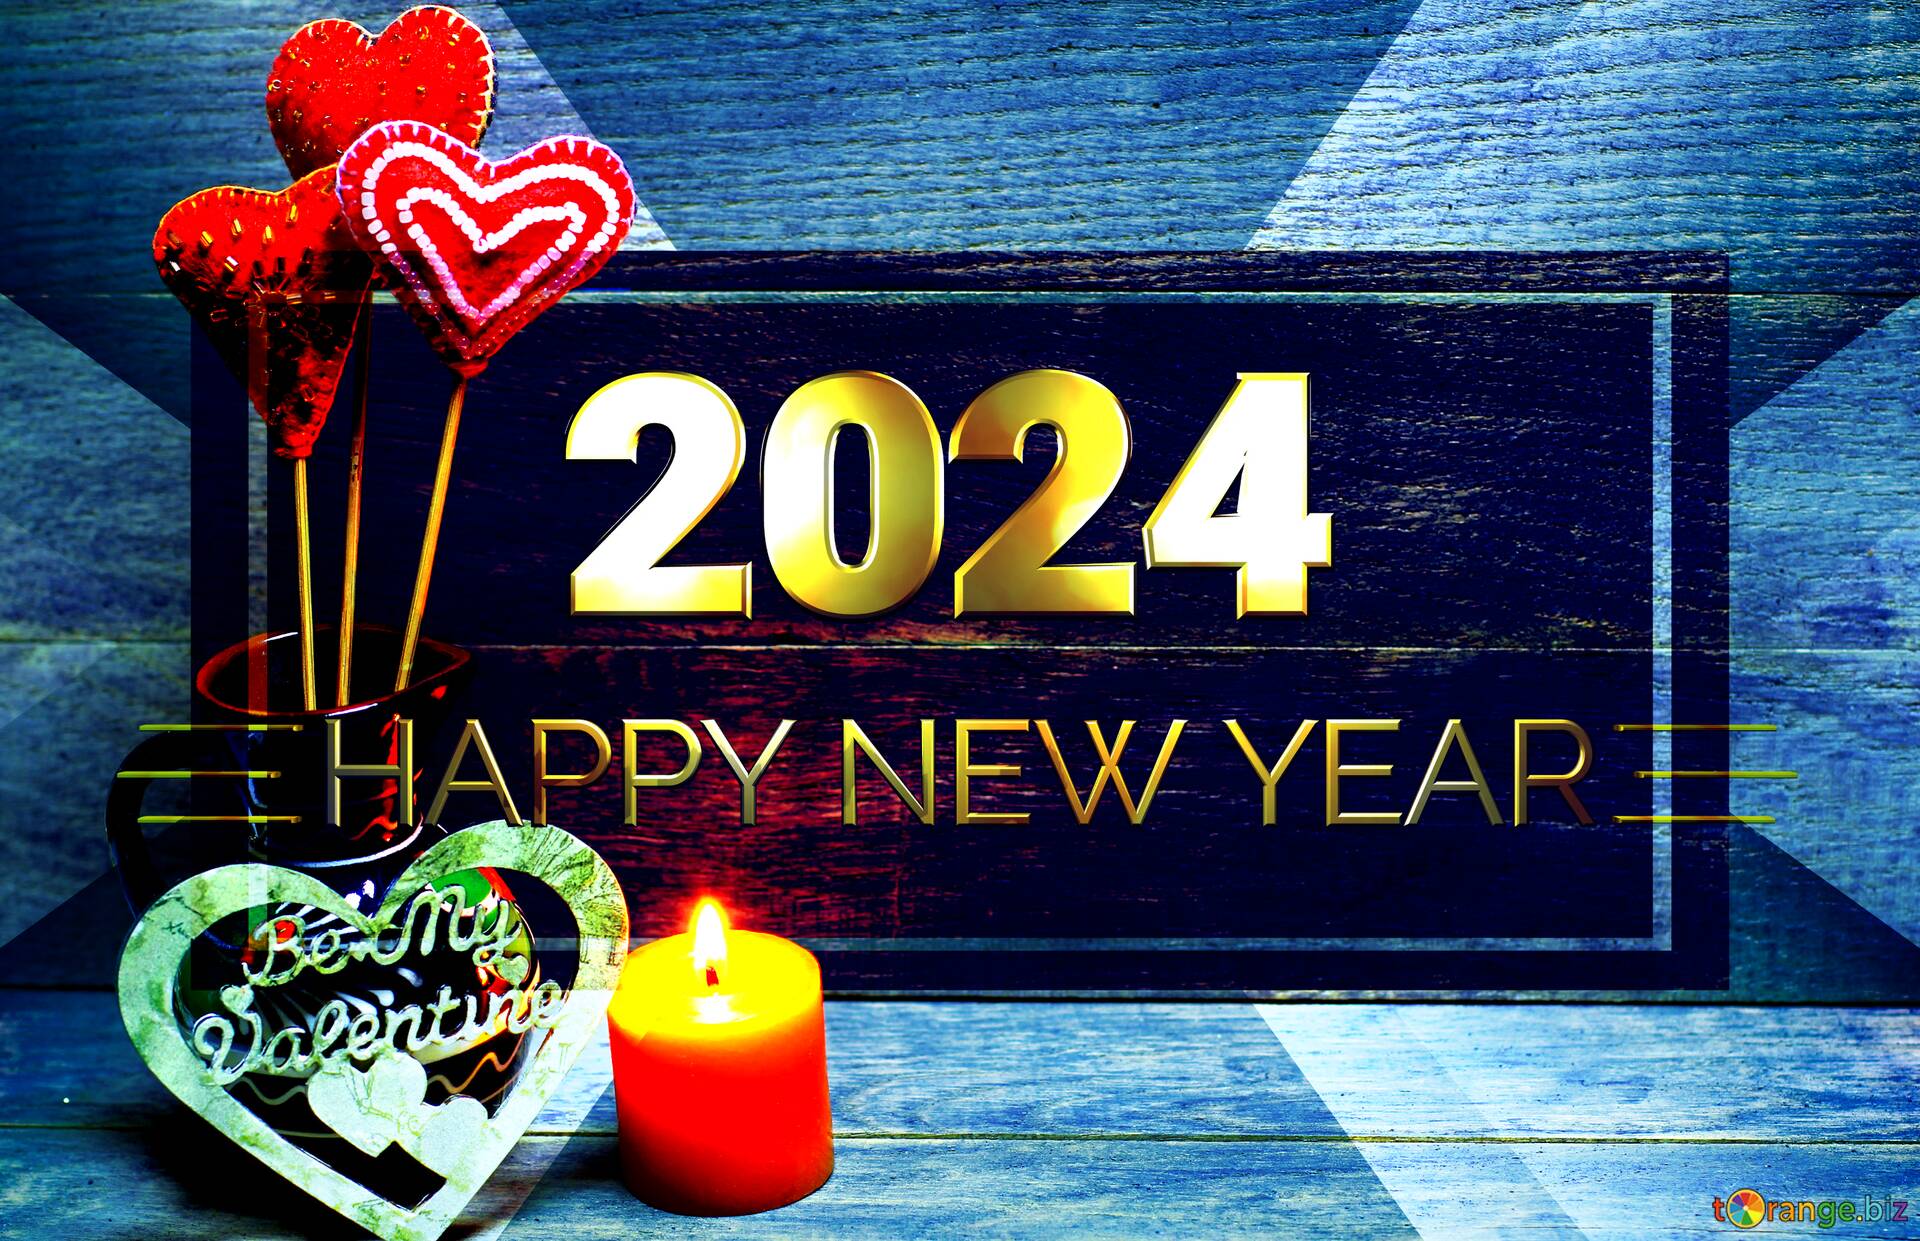 Download free picture Love background with candles happy new year 2021